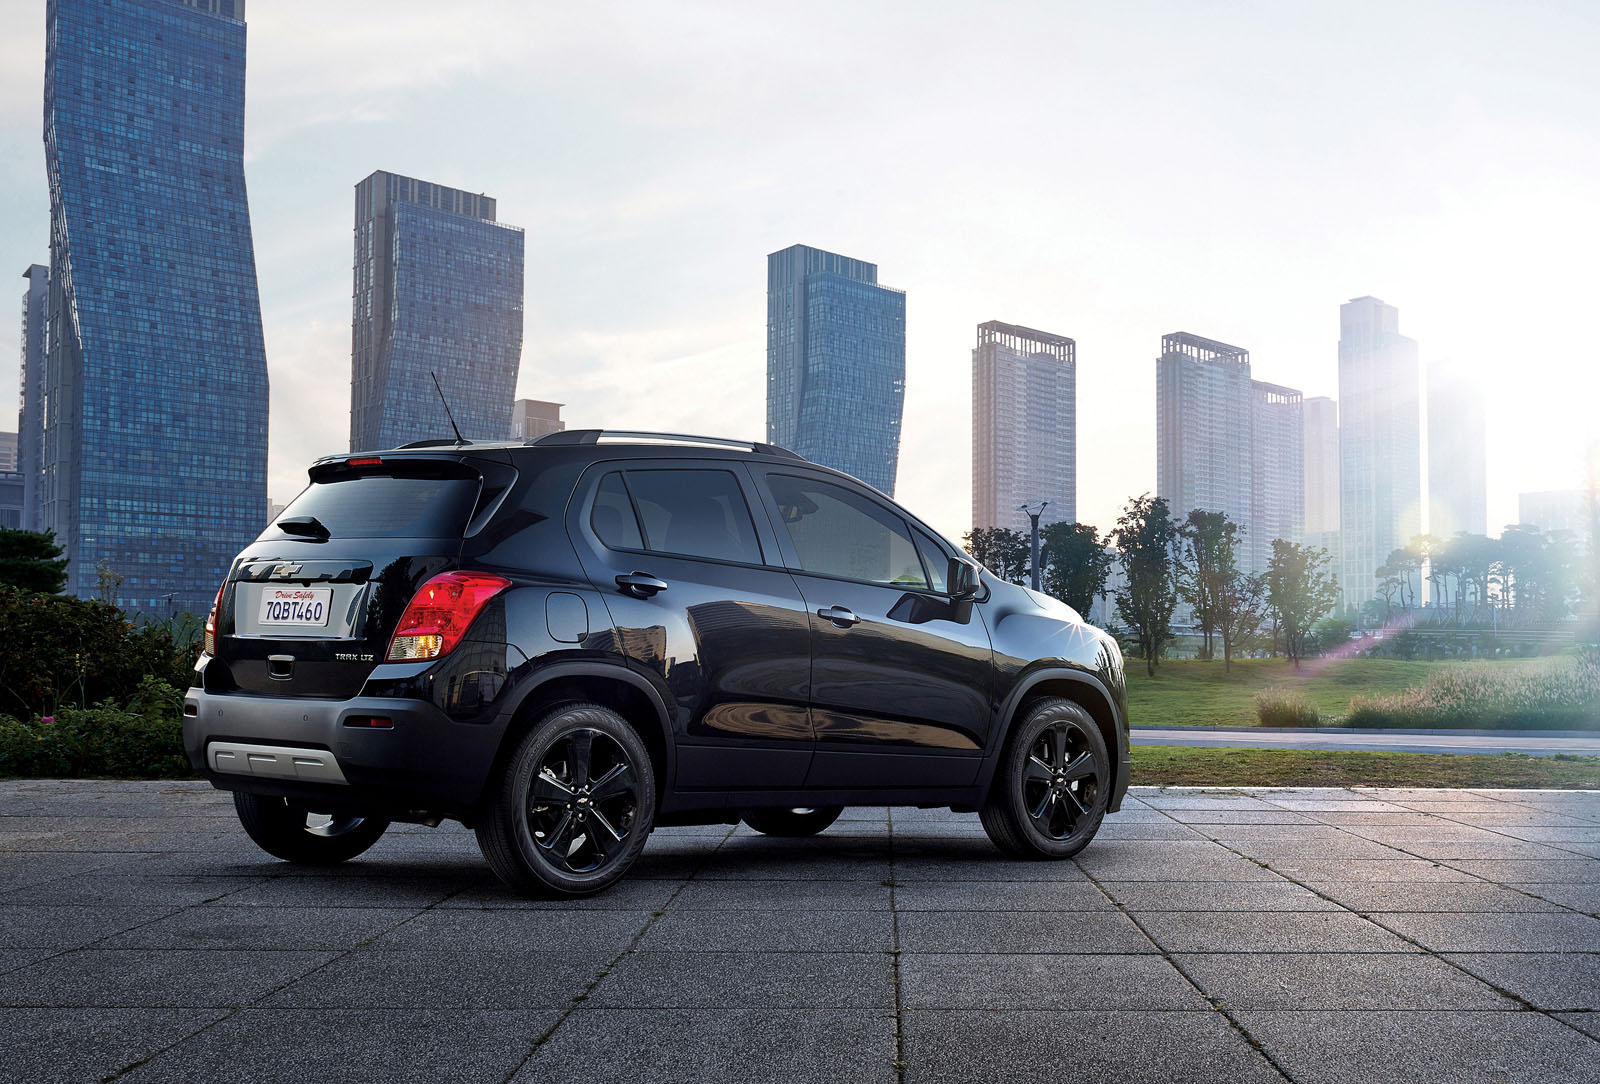 2016 Chevrolet Trax Midnight Edition. The Trax Midnight Edition goes on sale late February 2016.